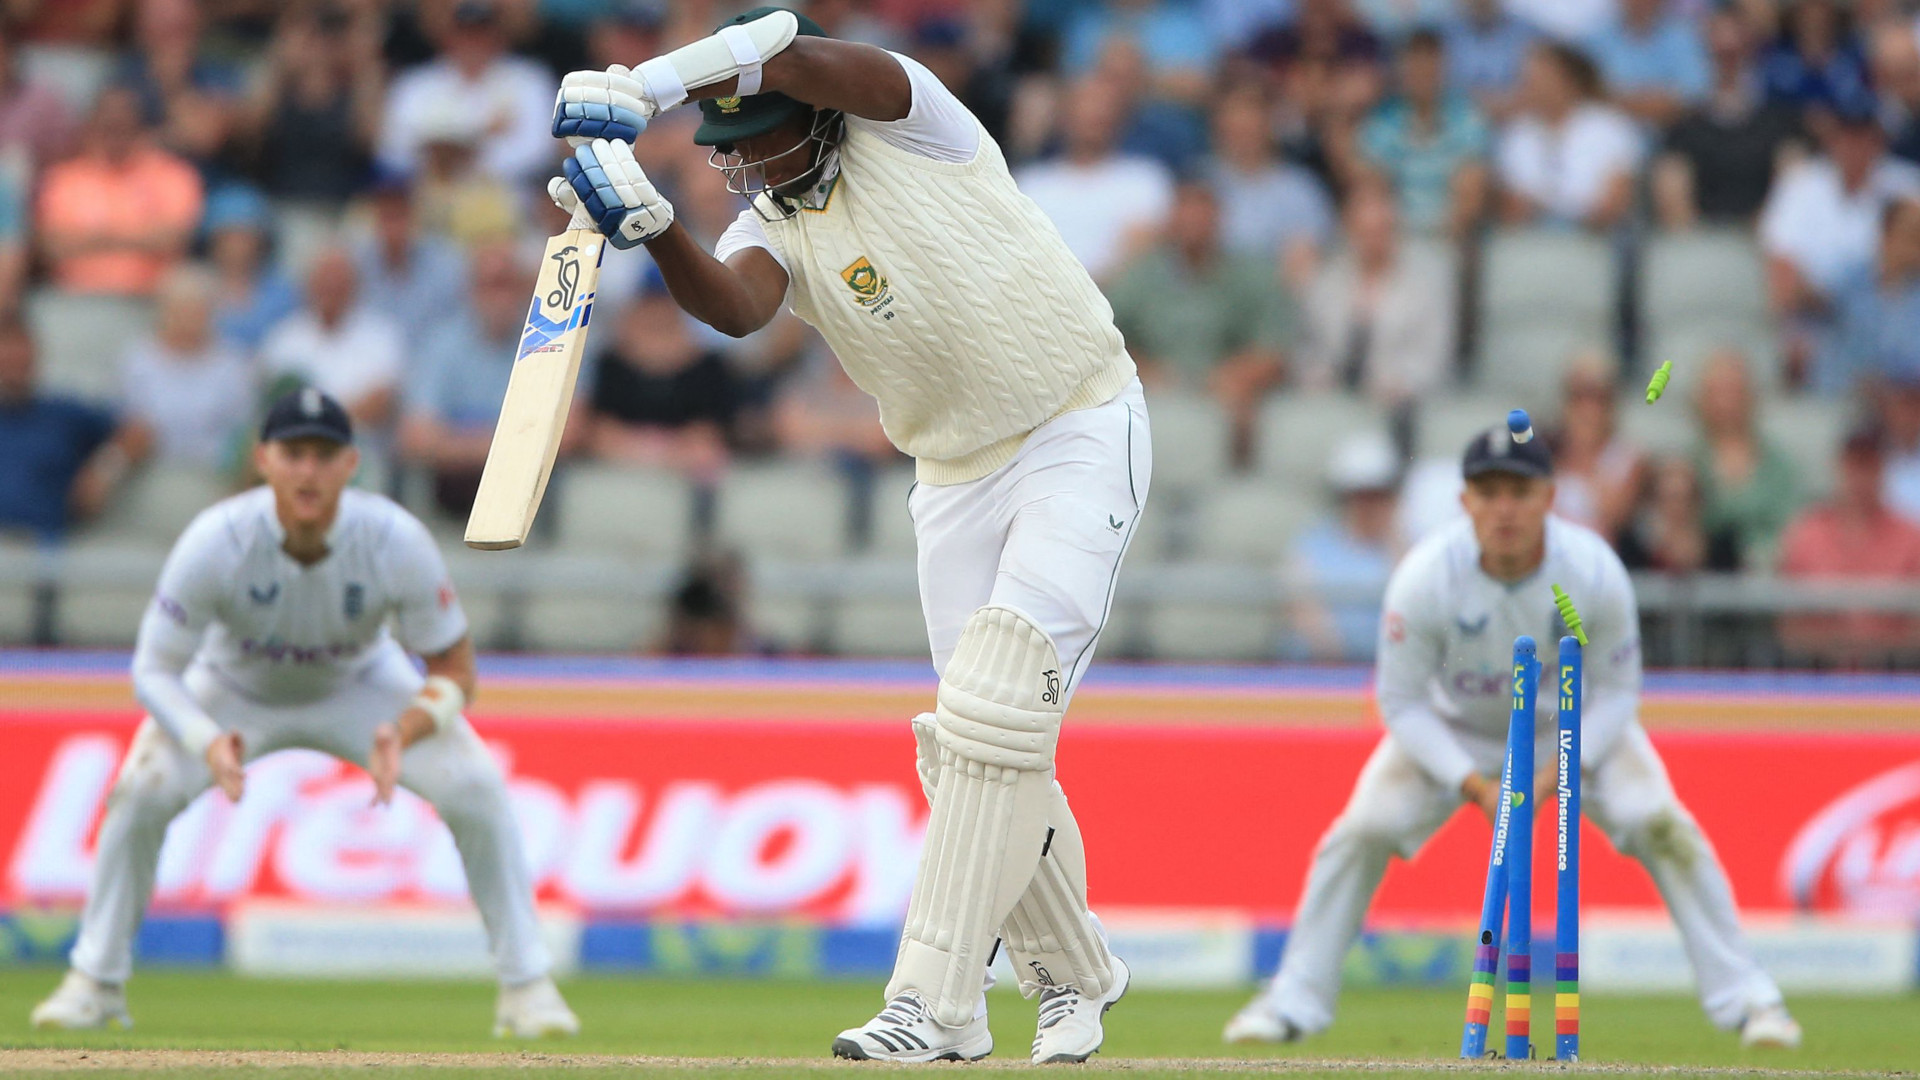 England vs South Africa live stream how to watch 3rd Test cricket online from anywhere, hosts on cusp of victory on Day 5 TechRadar